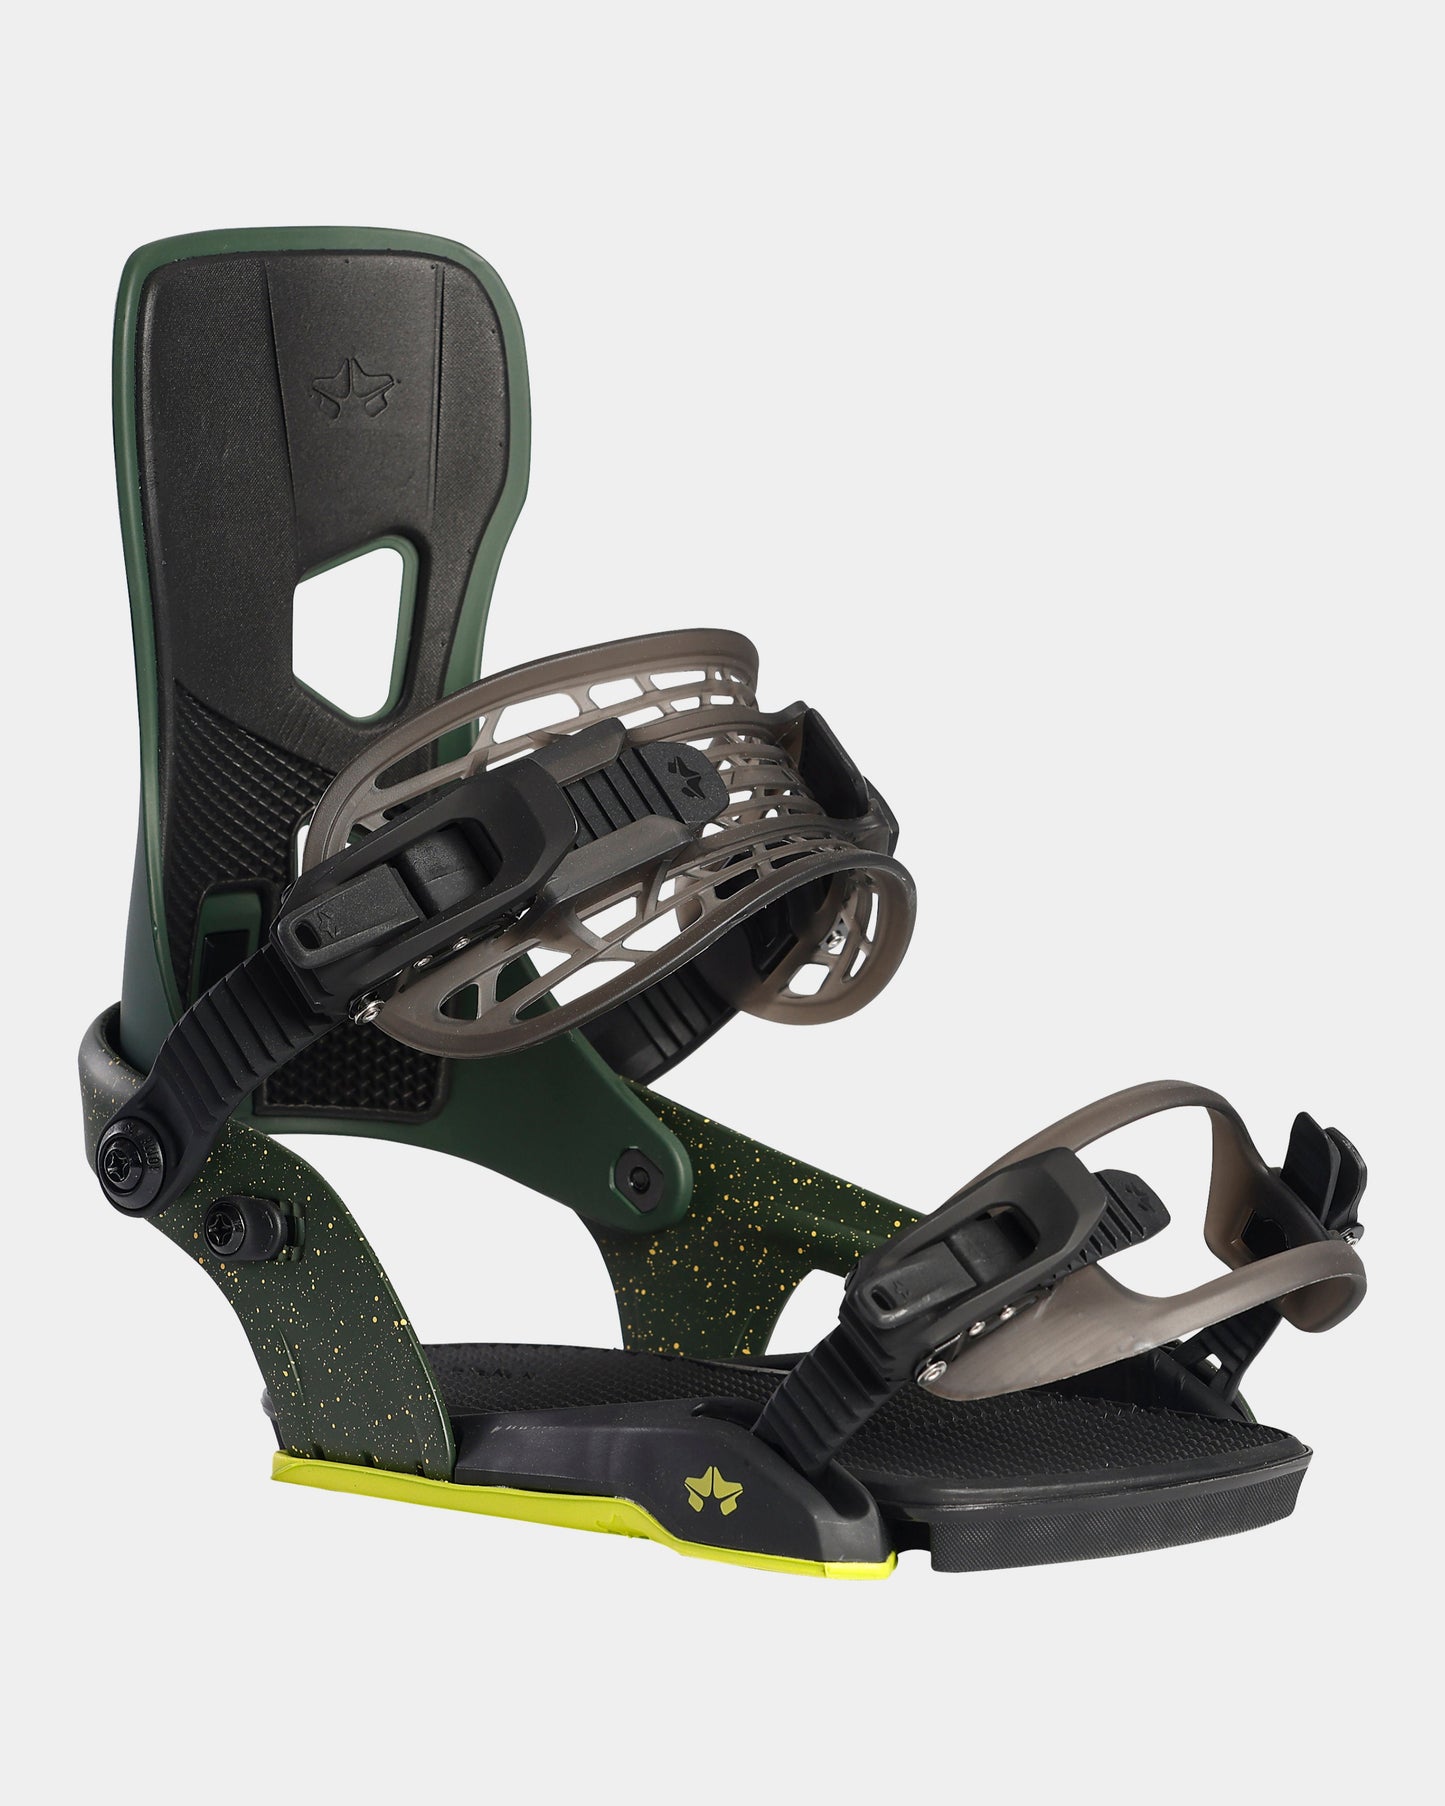 Rome Crux bindings 2022 rome sds bindings product photo from the side cover shot in the studio color swamp